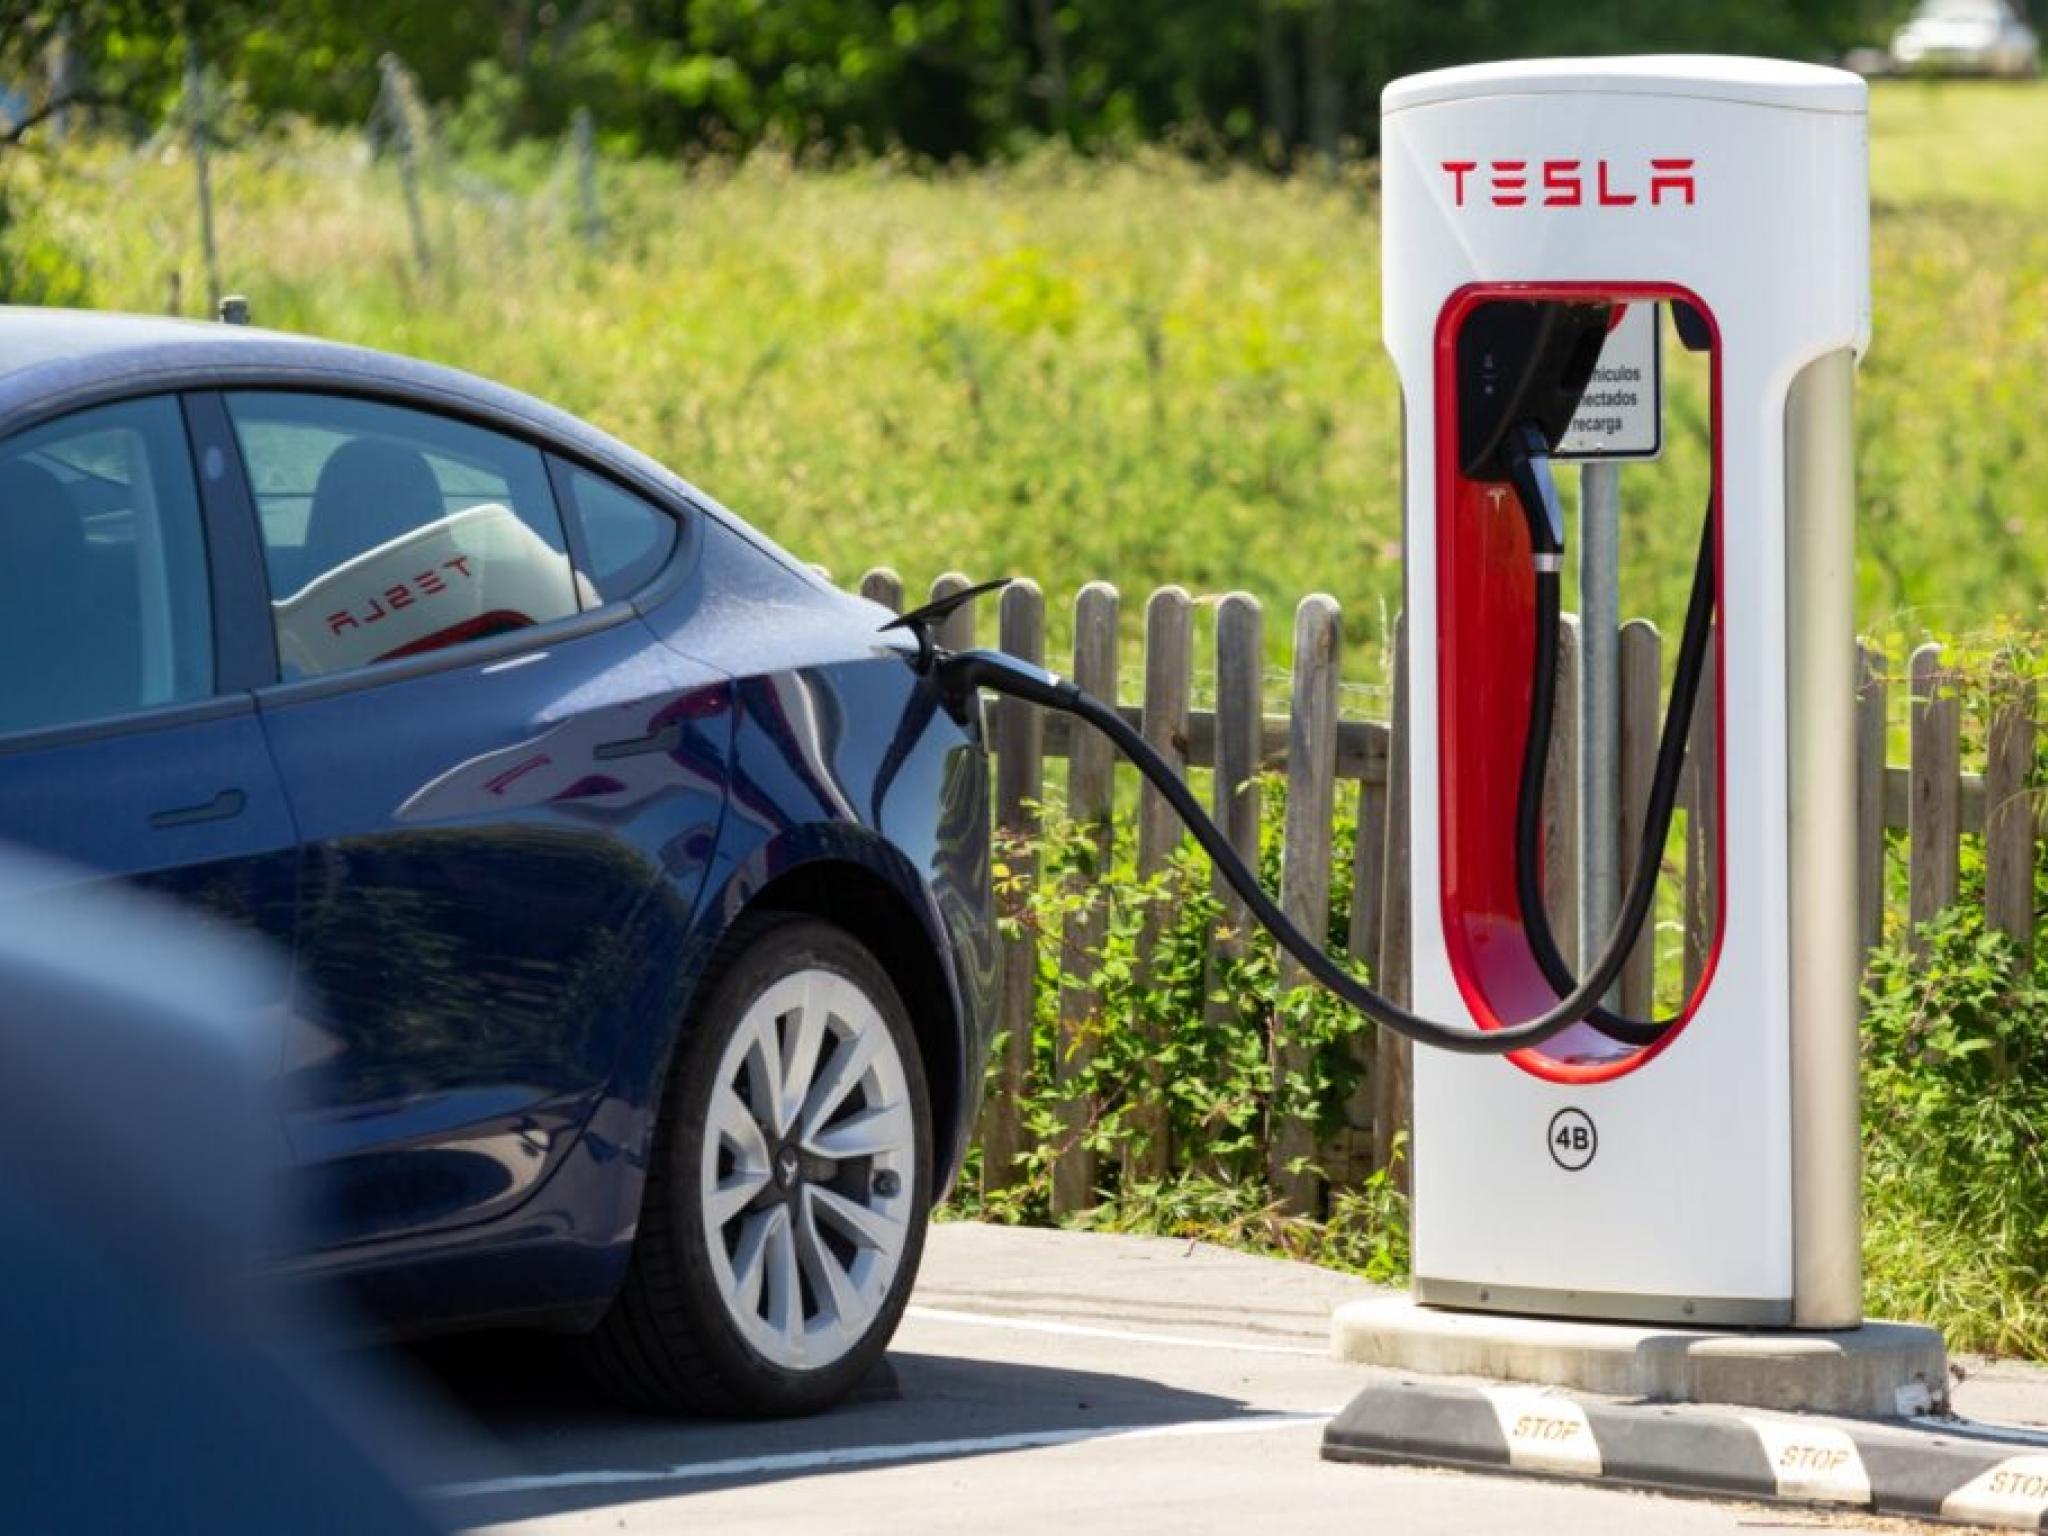  elon-musk-debunks-rumors-of-death-of-tesla-supercharger-network-as-greatly-exaggerated-says-it-is-continuing-to-grow 